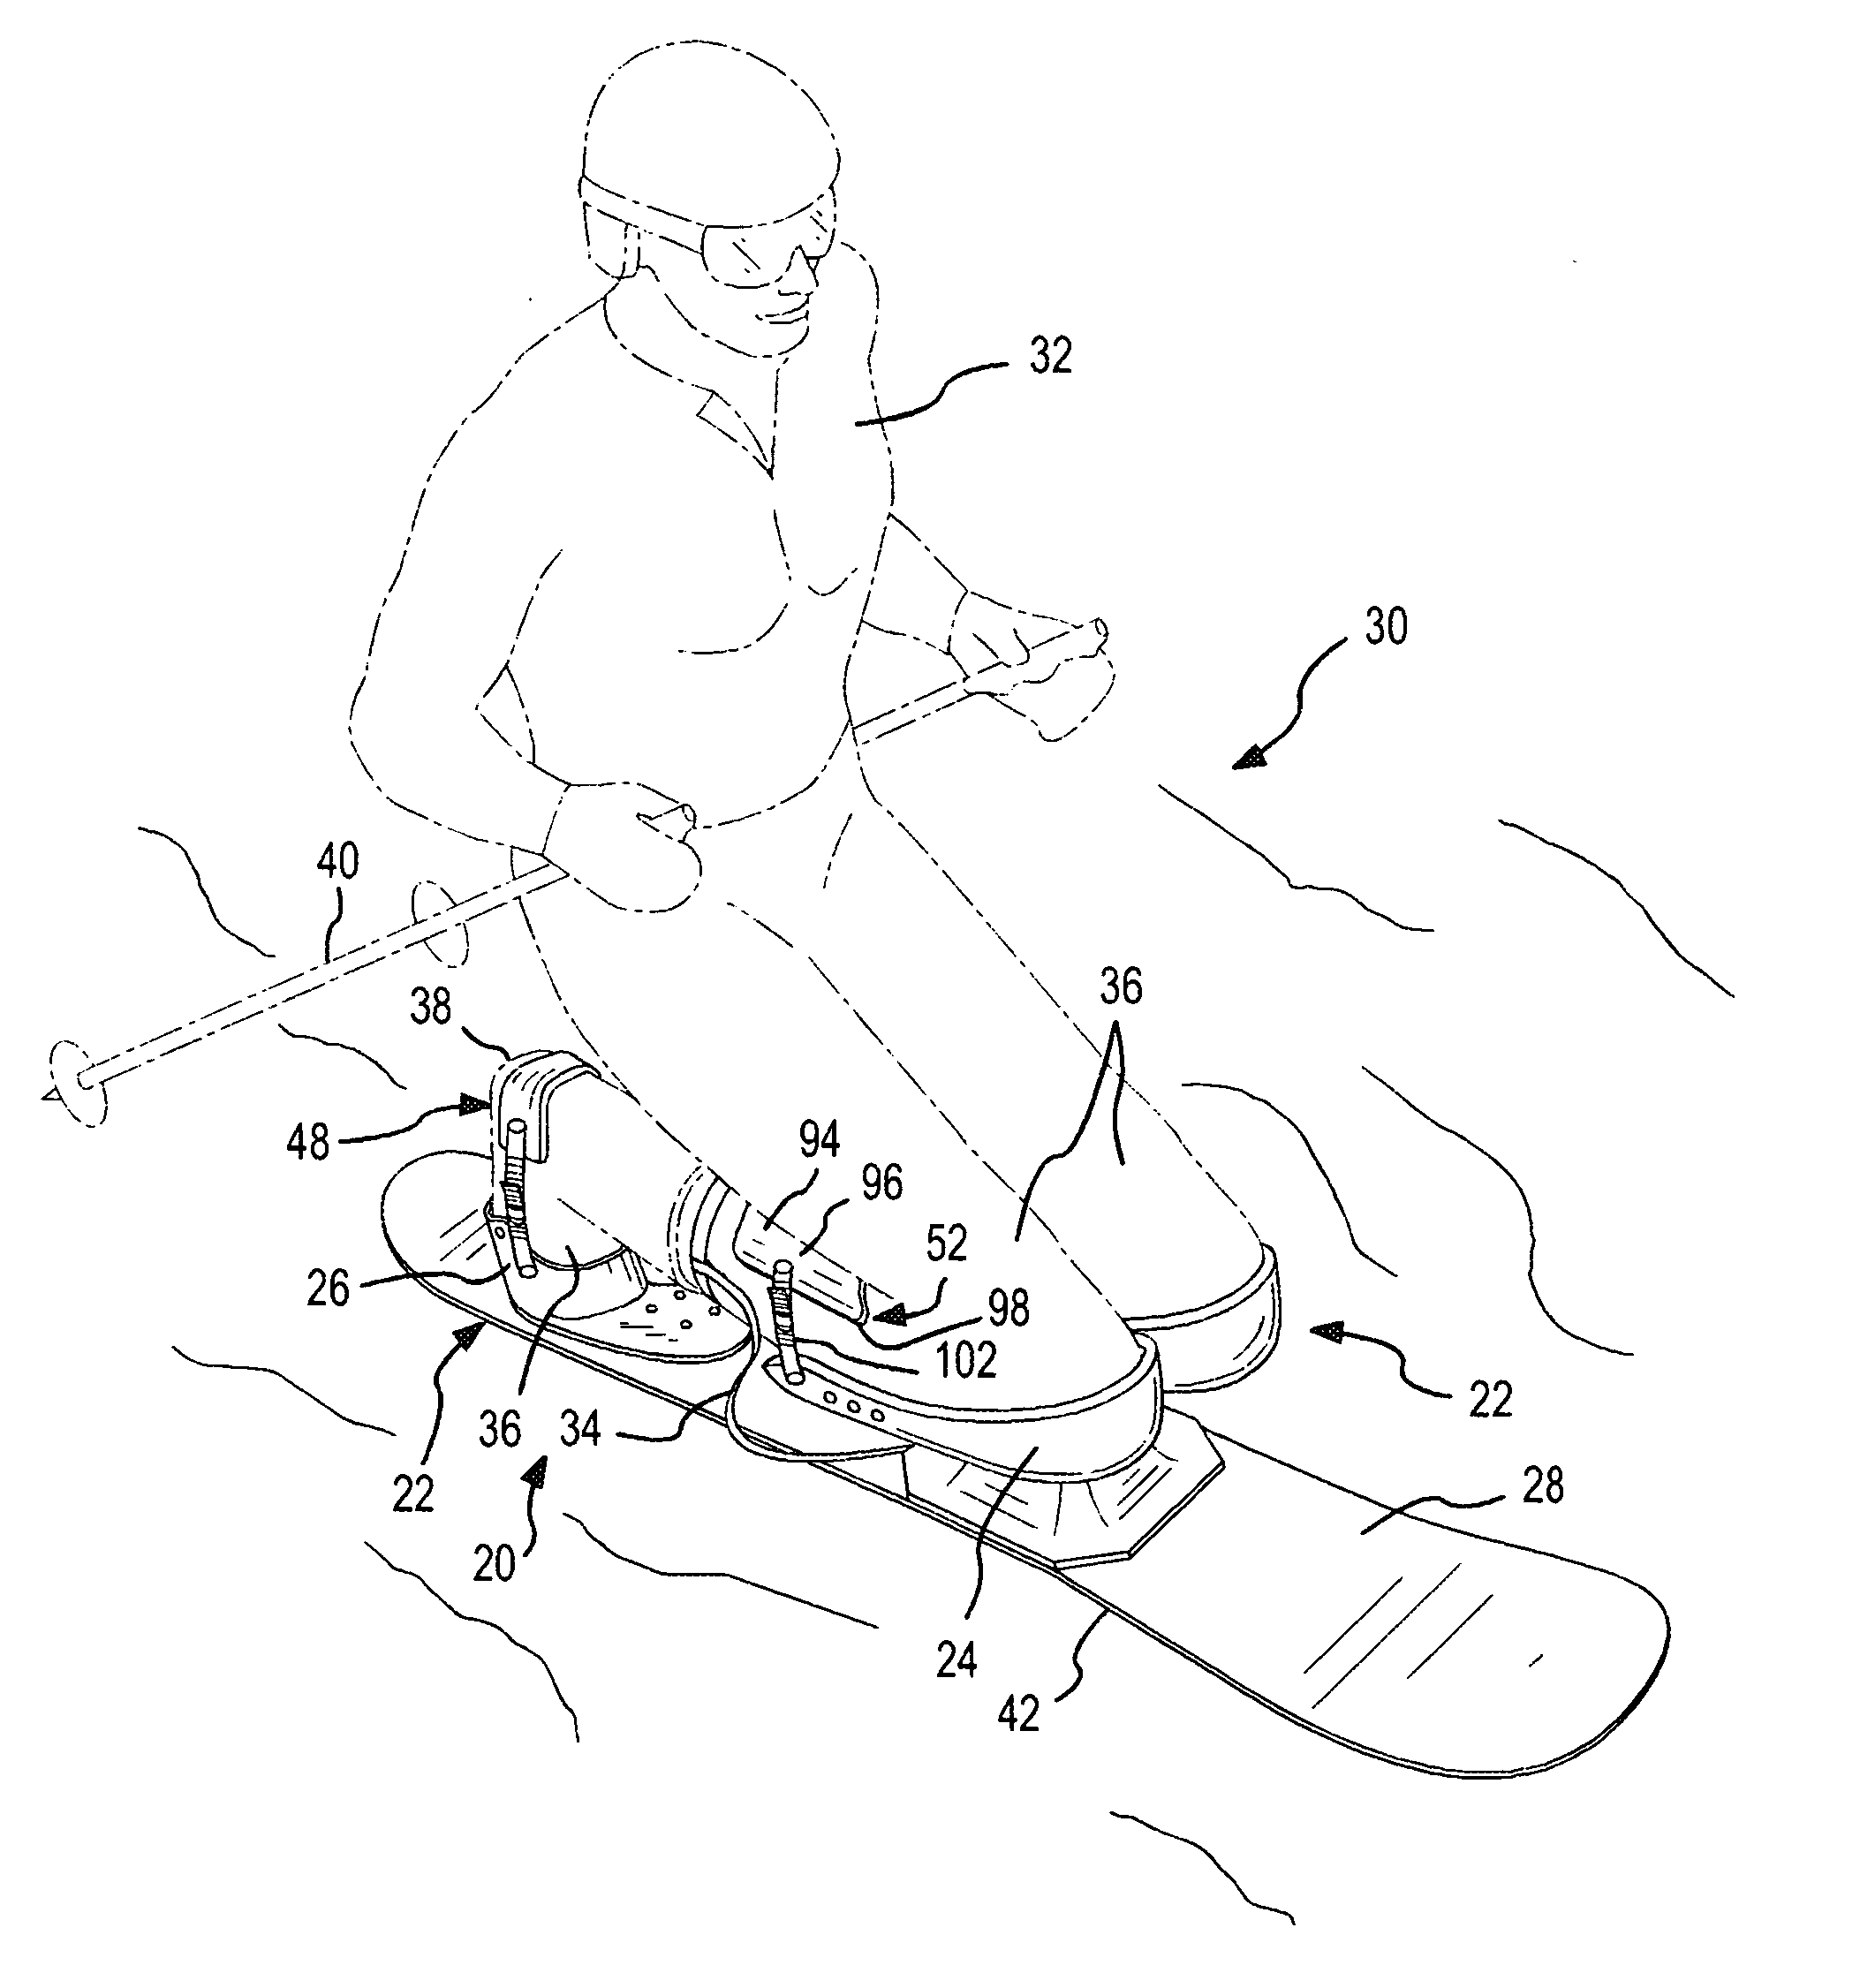 Kneeboard device and method of attaching a person to a snowboard deck